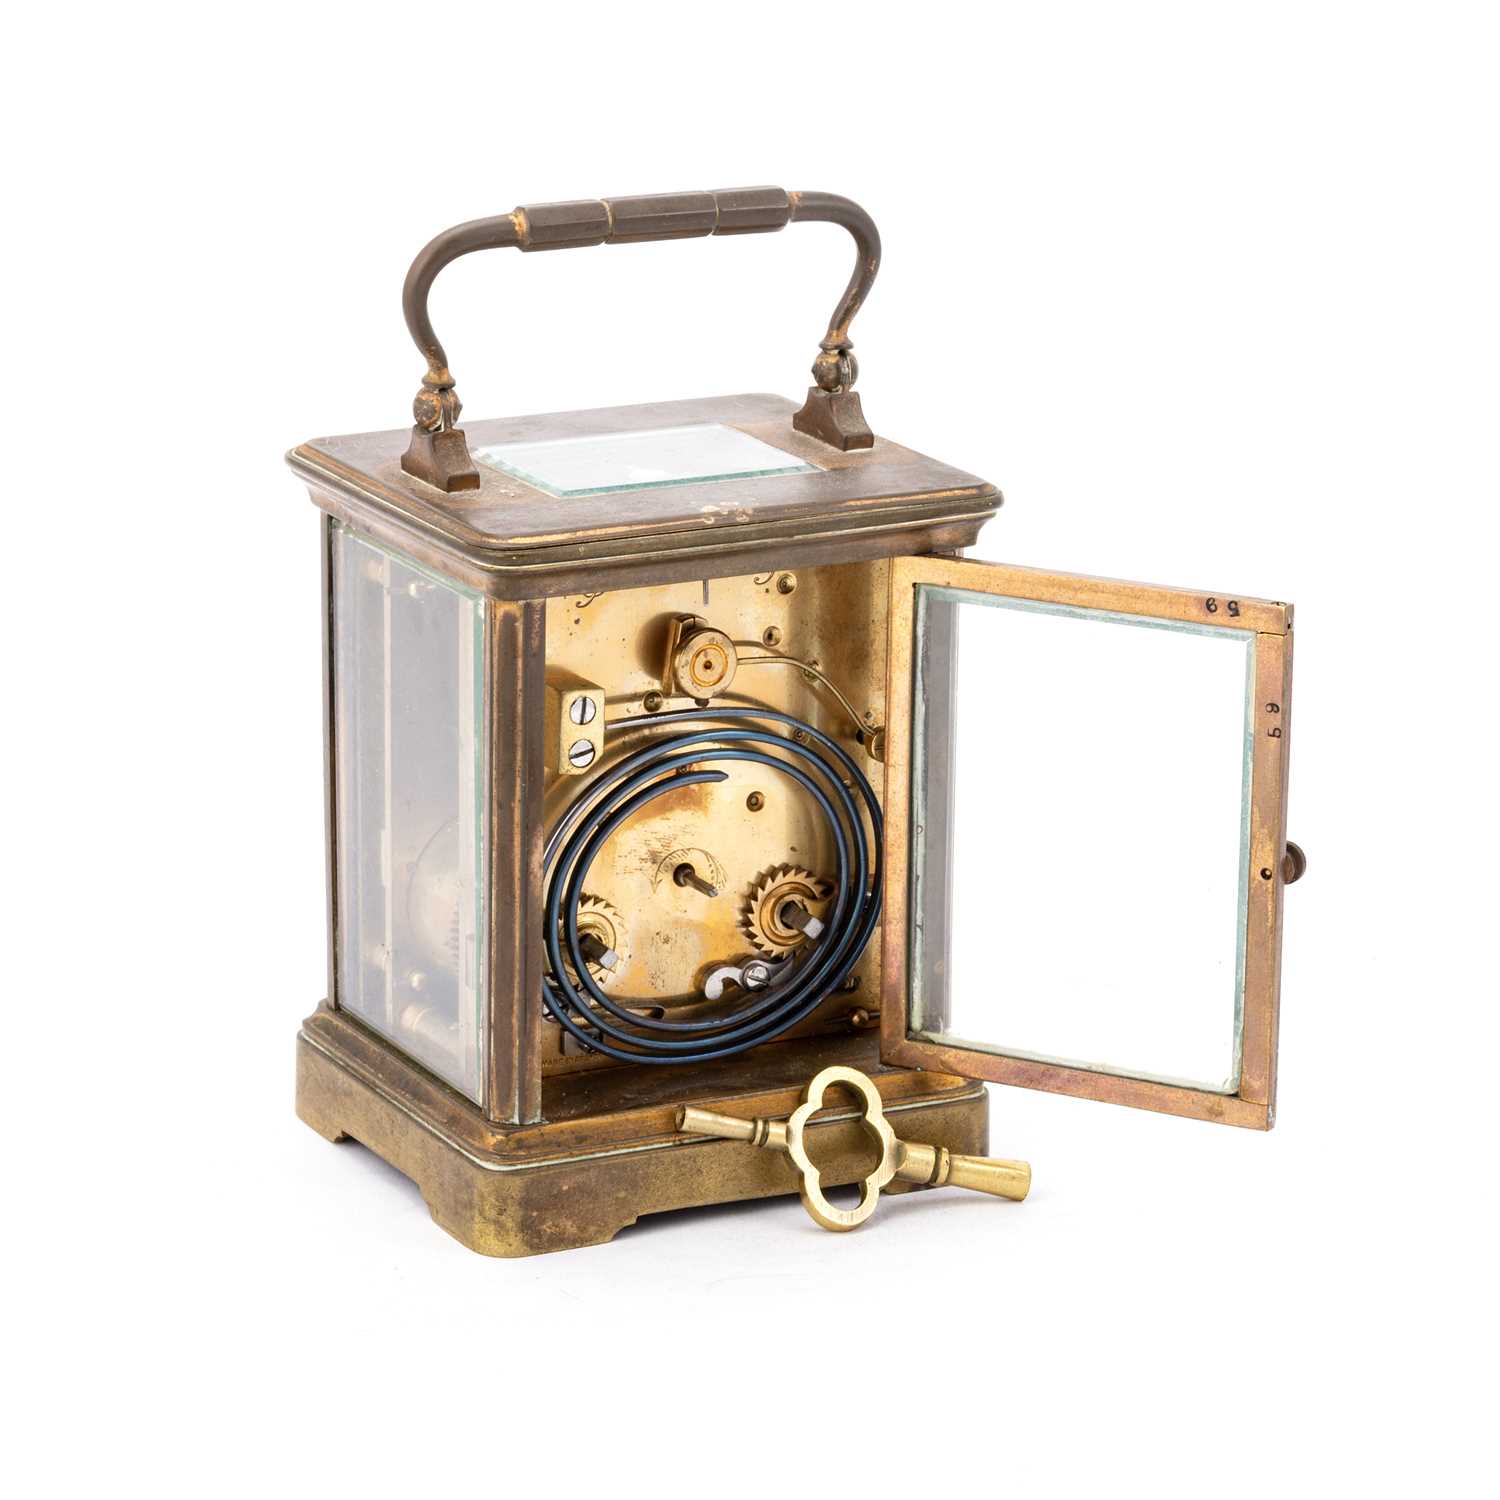 A FRENCH BRASS-CASED CARRIAGE CLOCK, EARLY 20TH CENTURY - Image 2 of 2